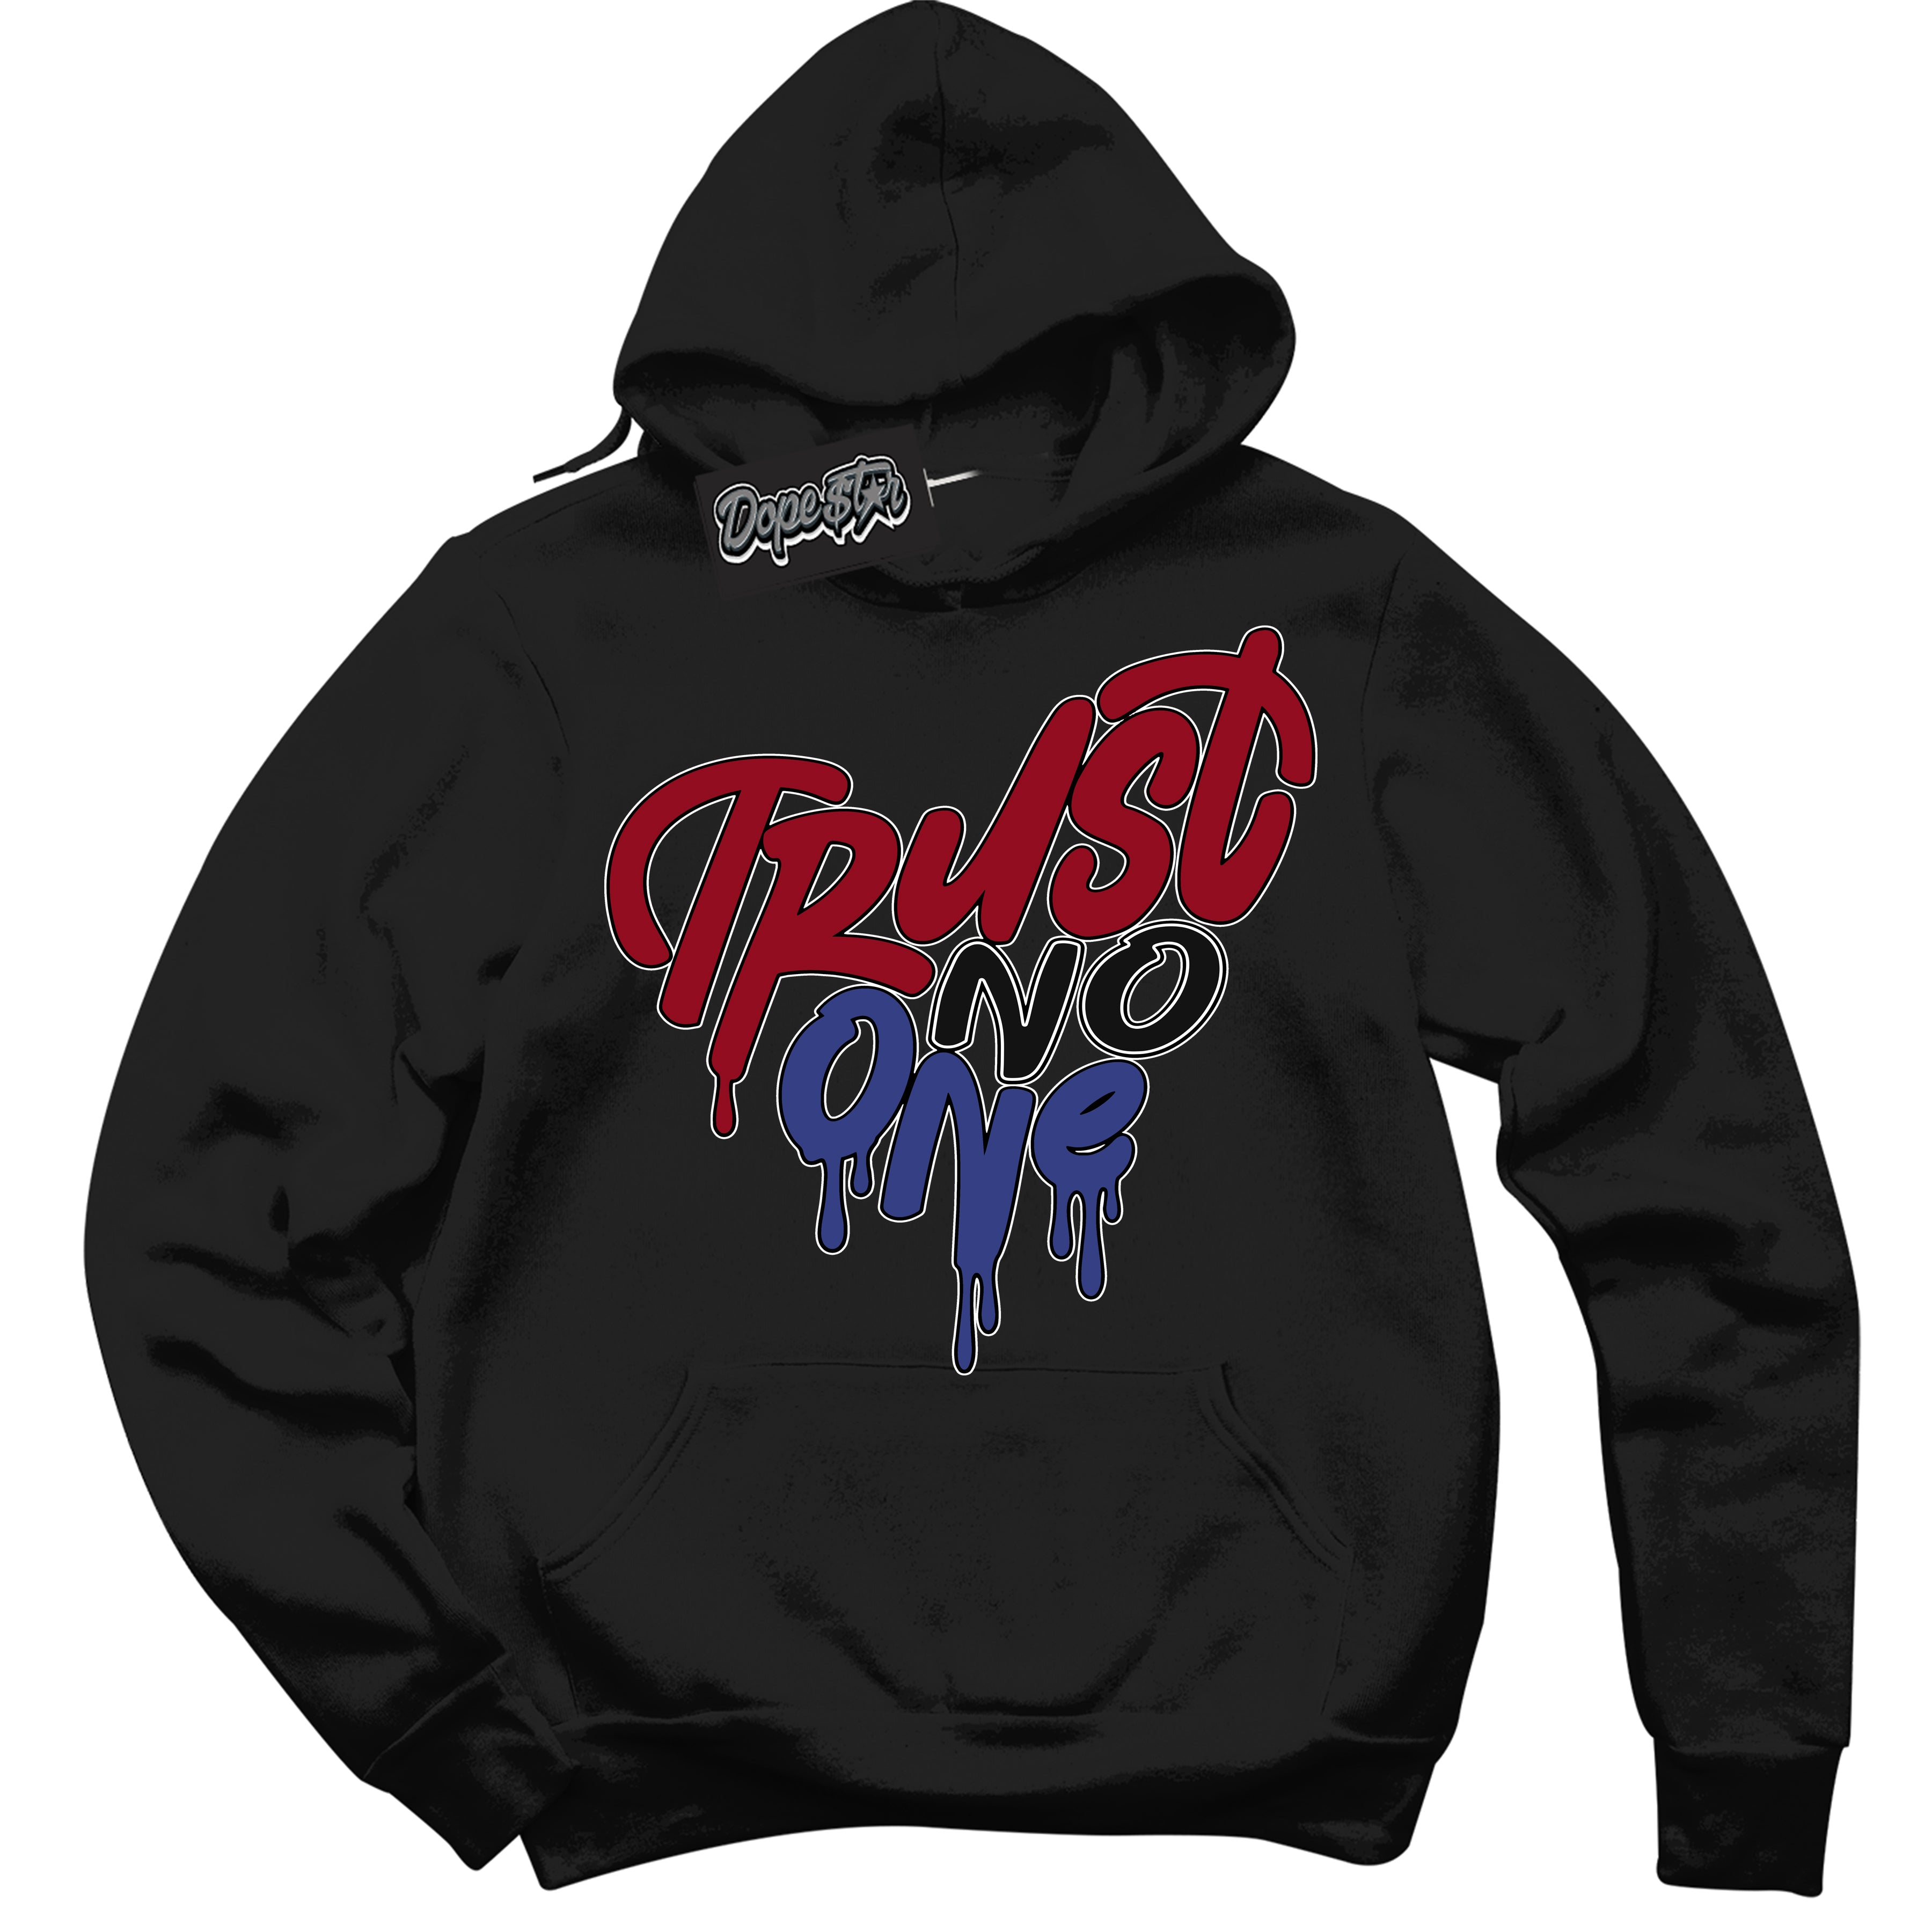 Cool Black Hoodie with “ Trust No One Heart ”  design that Perfectly Matches Playoffs 8s Sneakers.